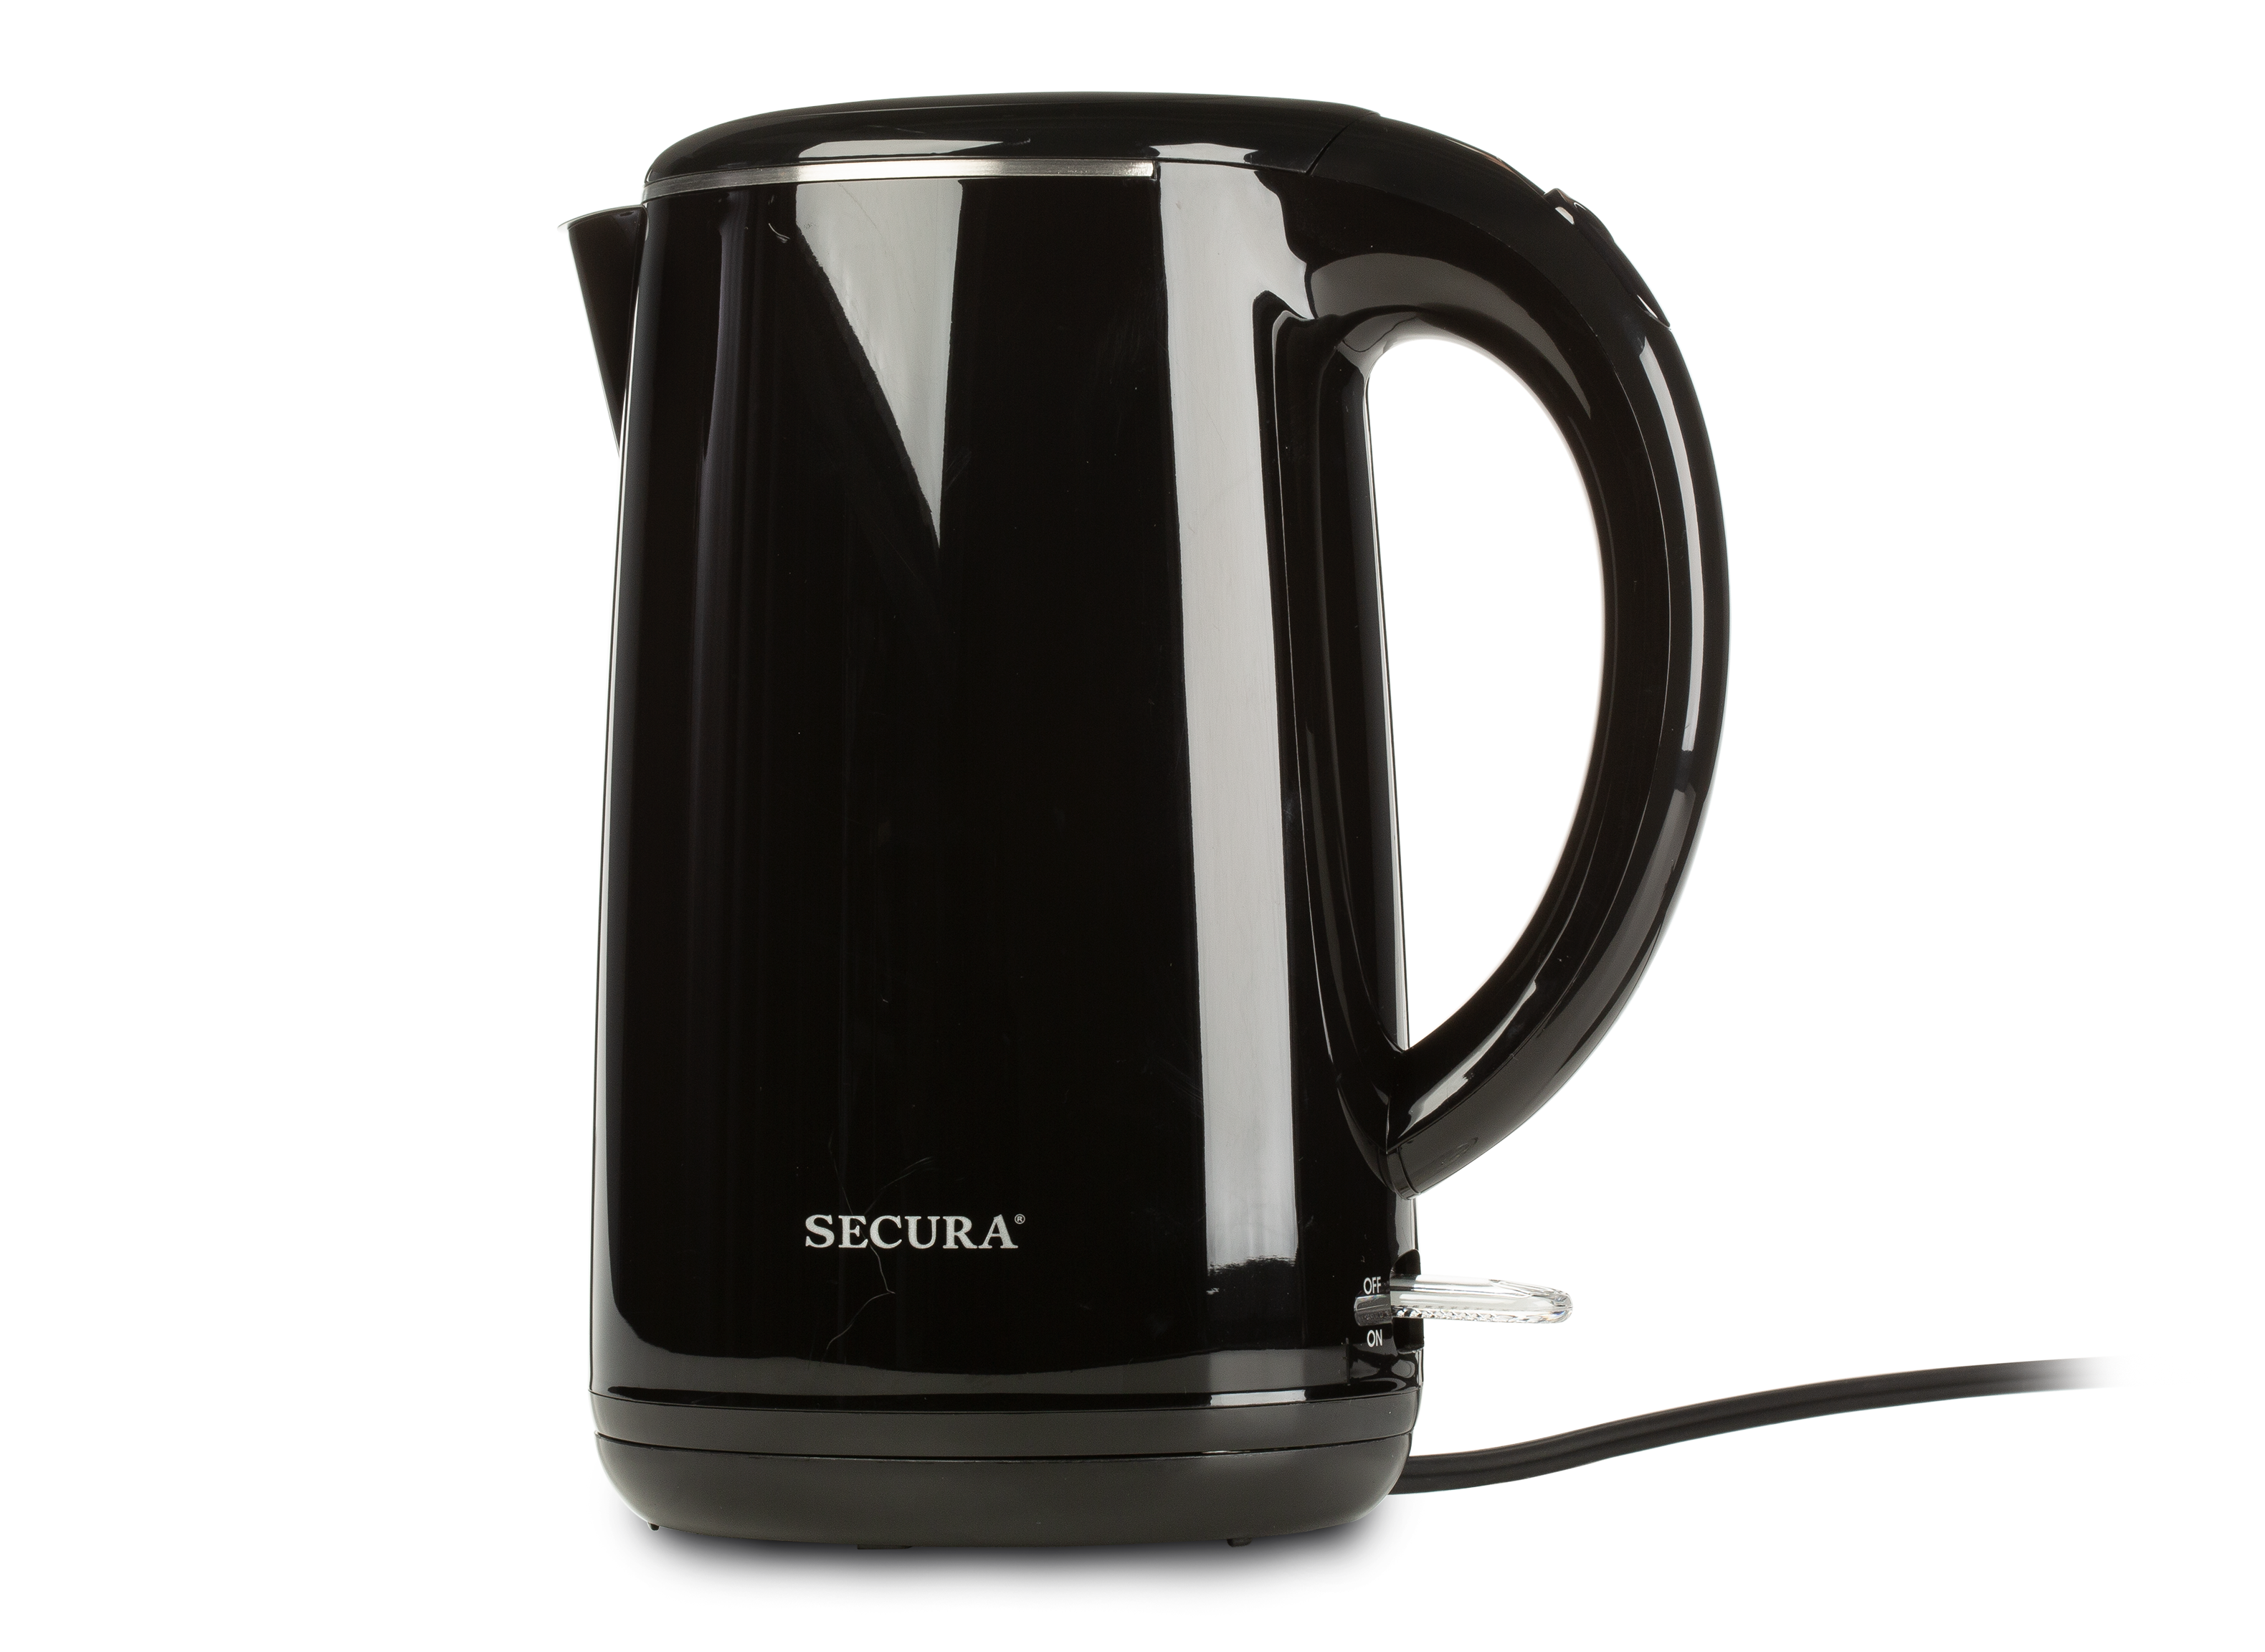 https://crdms.images.consumerreports.org/prod/products/cr/models/398998-electric-kettles-secura-the-original-stainless-steel-electric-kettle-swk-1701db-10007136.png